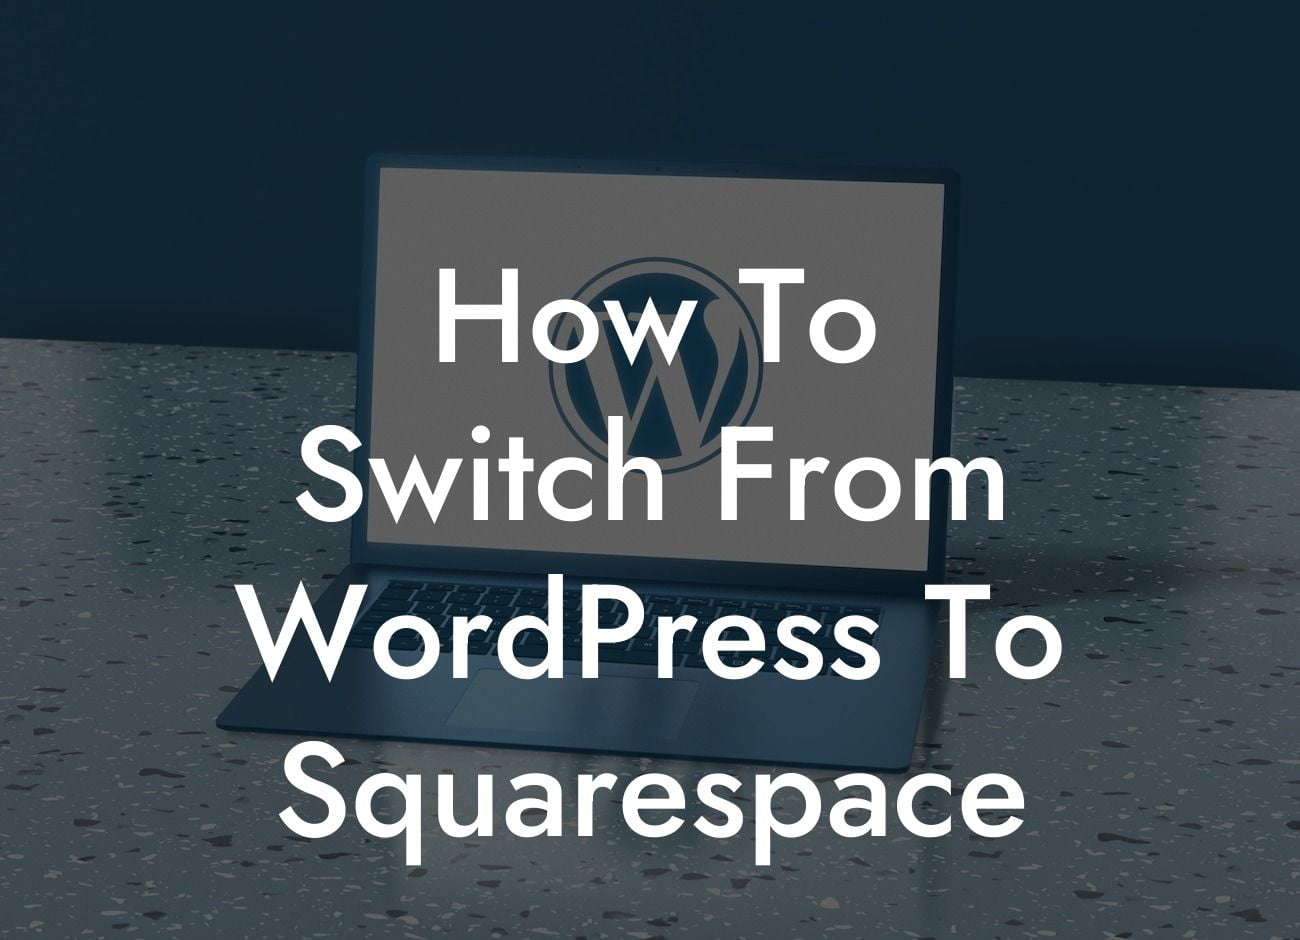 How To Switch From WordPress To Squarespace